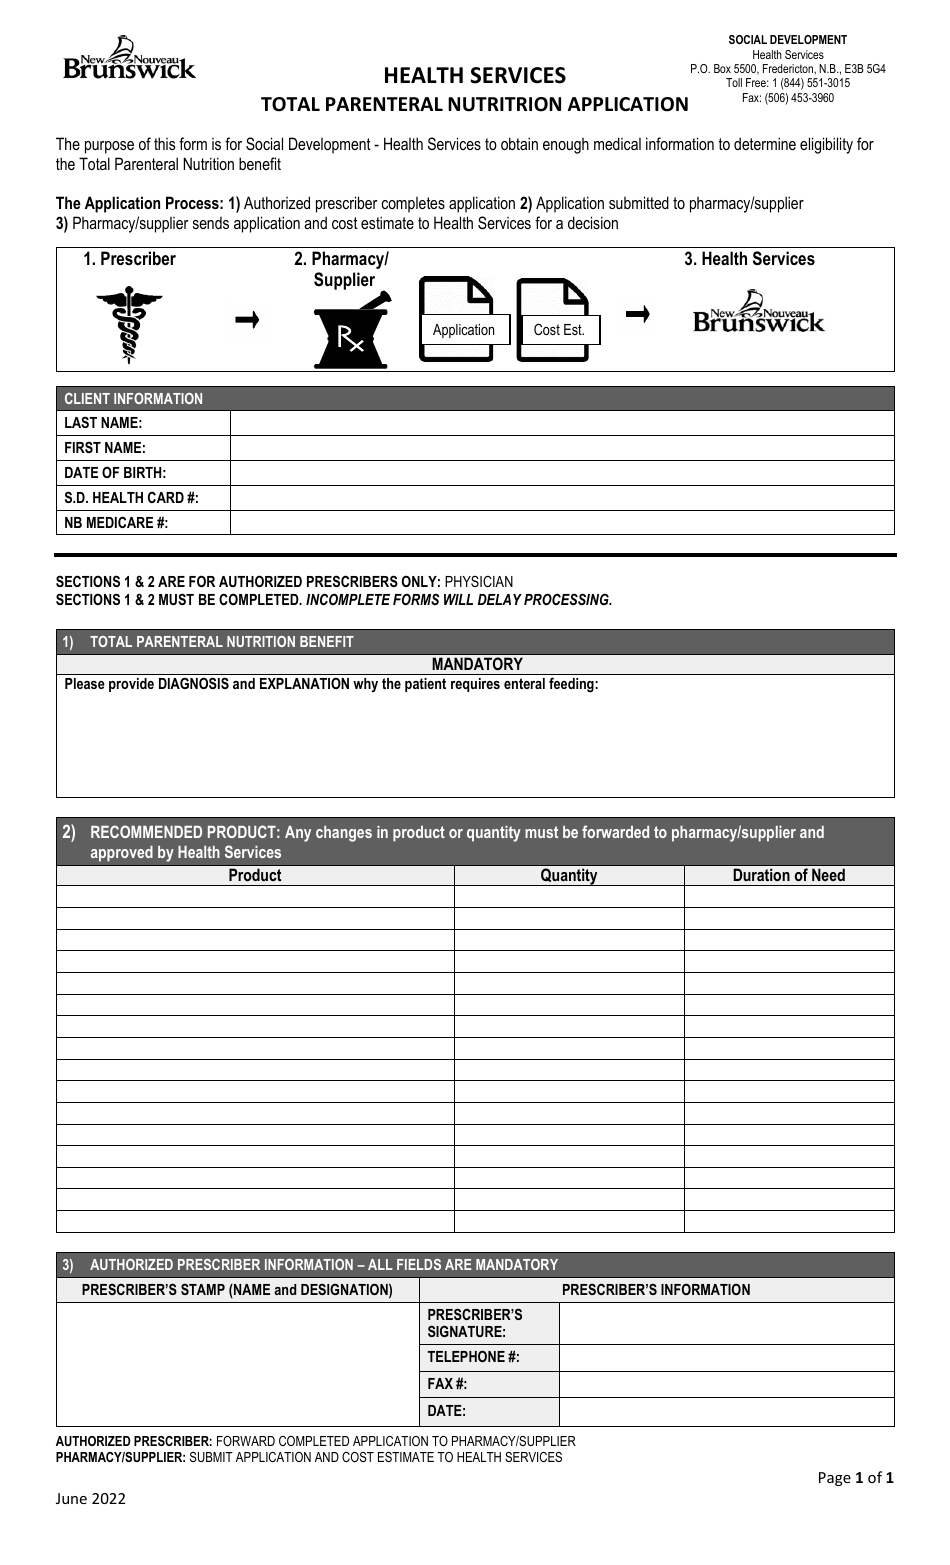 Total Parenteral Nutrition Application - New Brunswick, Canada, Page 1